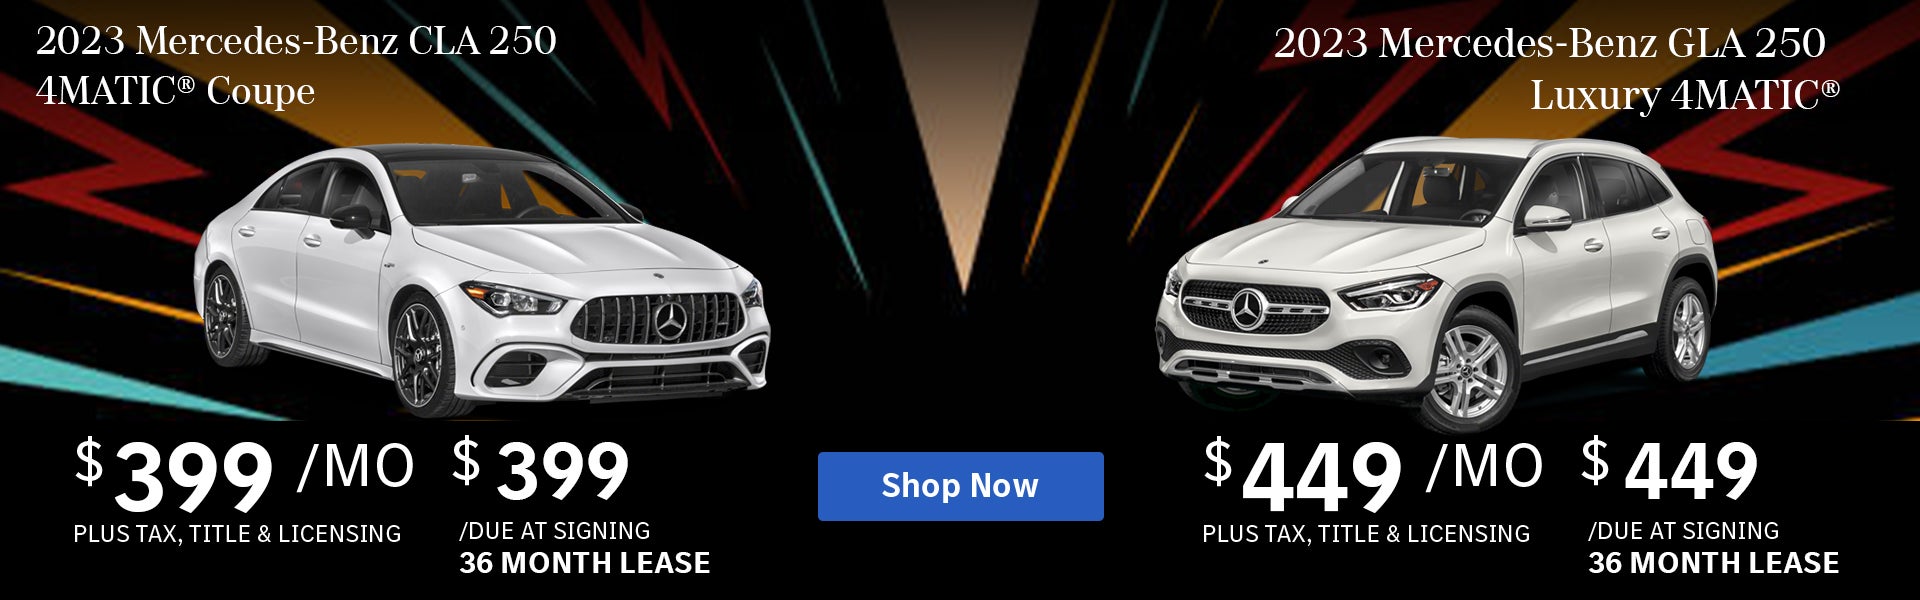 CLA and GLA lease specials